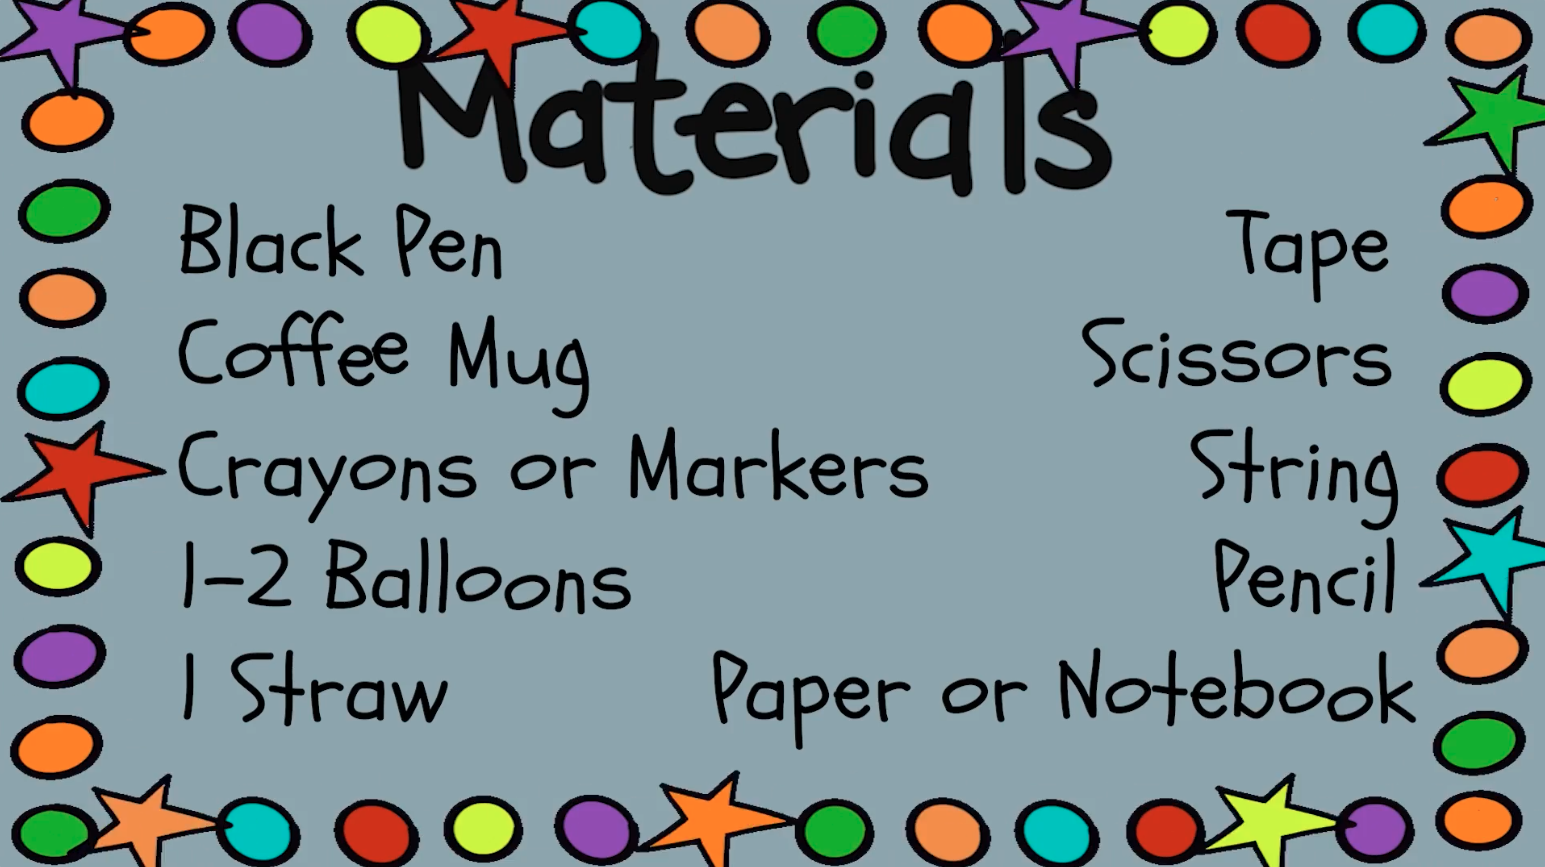 Materials list: Black pen, coffee mug, crayons or markers, 1 or 2 balloons, 1 straw, tape, scissors, string, pencil, paper or notebook